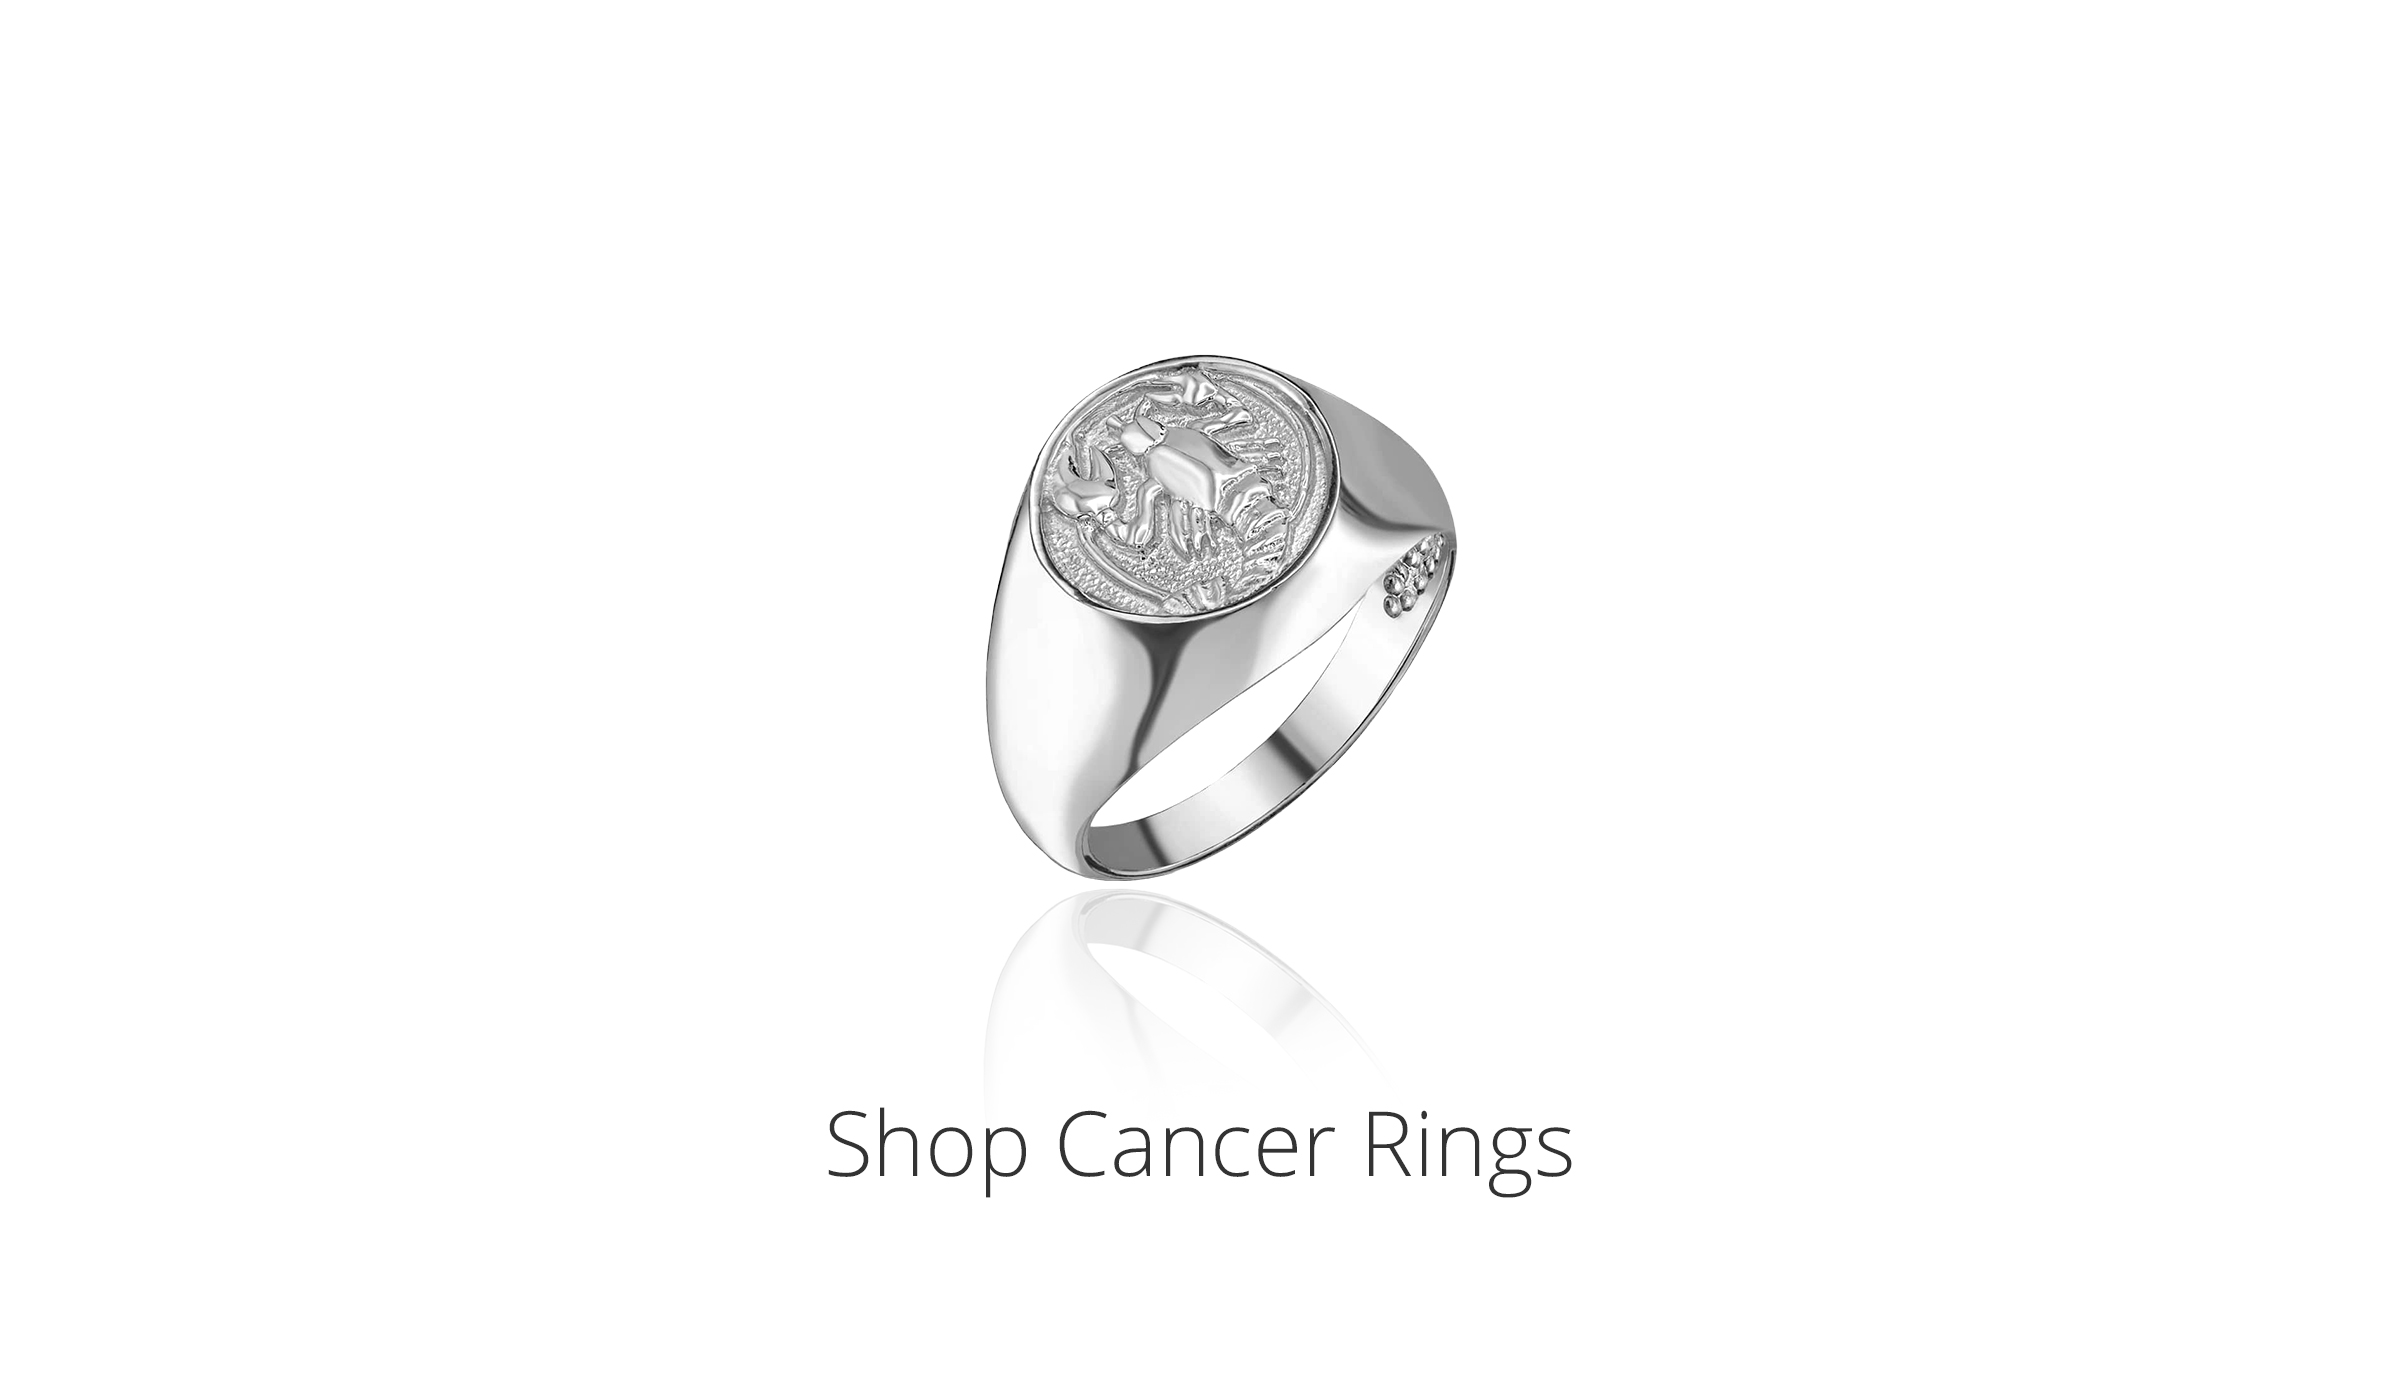 Shop Cancer Rings